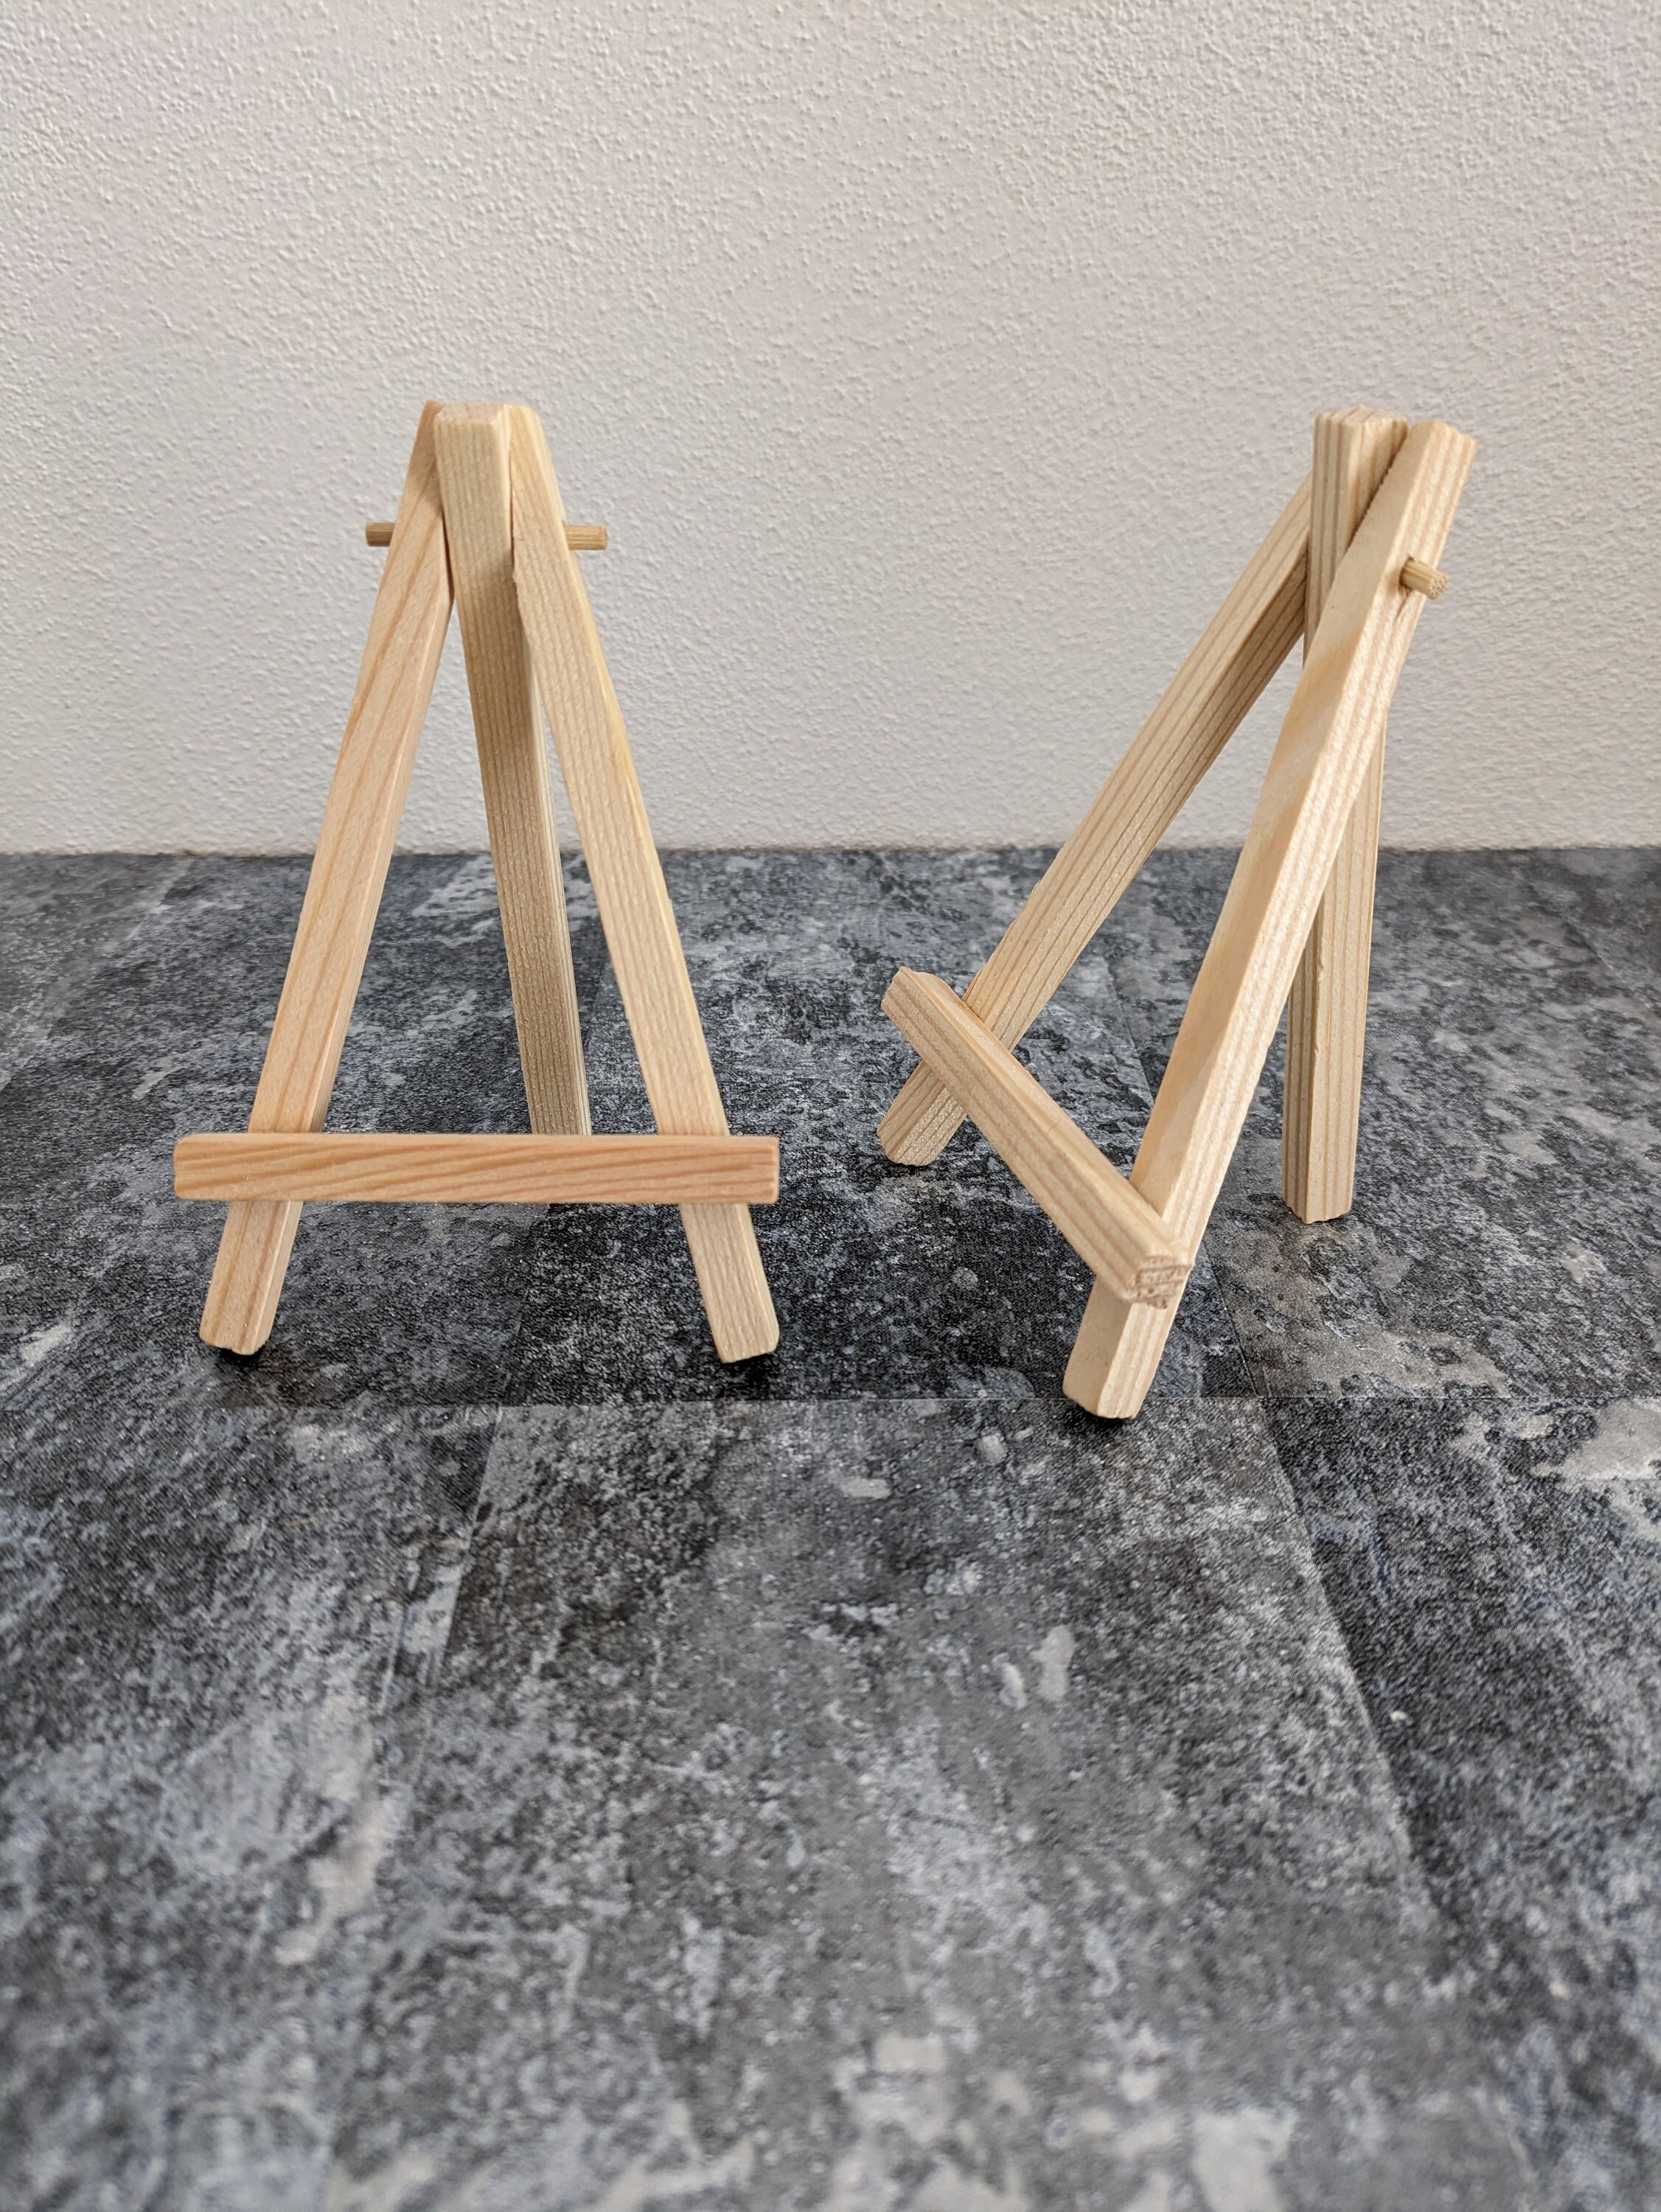 Wooden Easel, Wooden Picture Stand, Wooden Photo Stand, Desktop Triangle  Easel